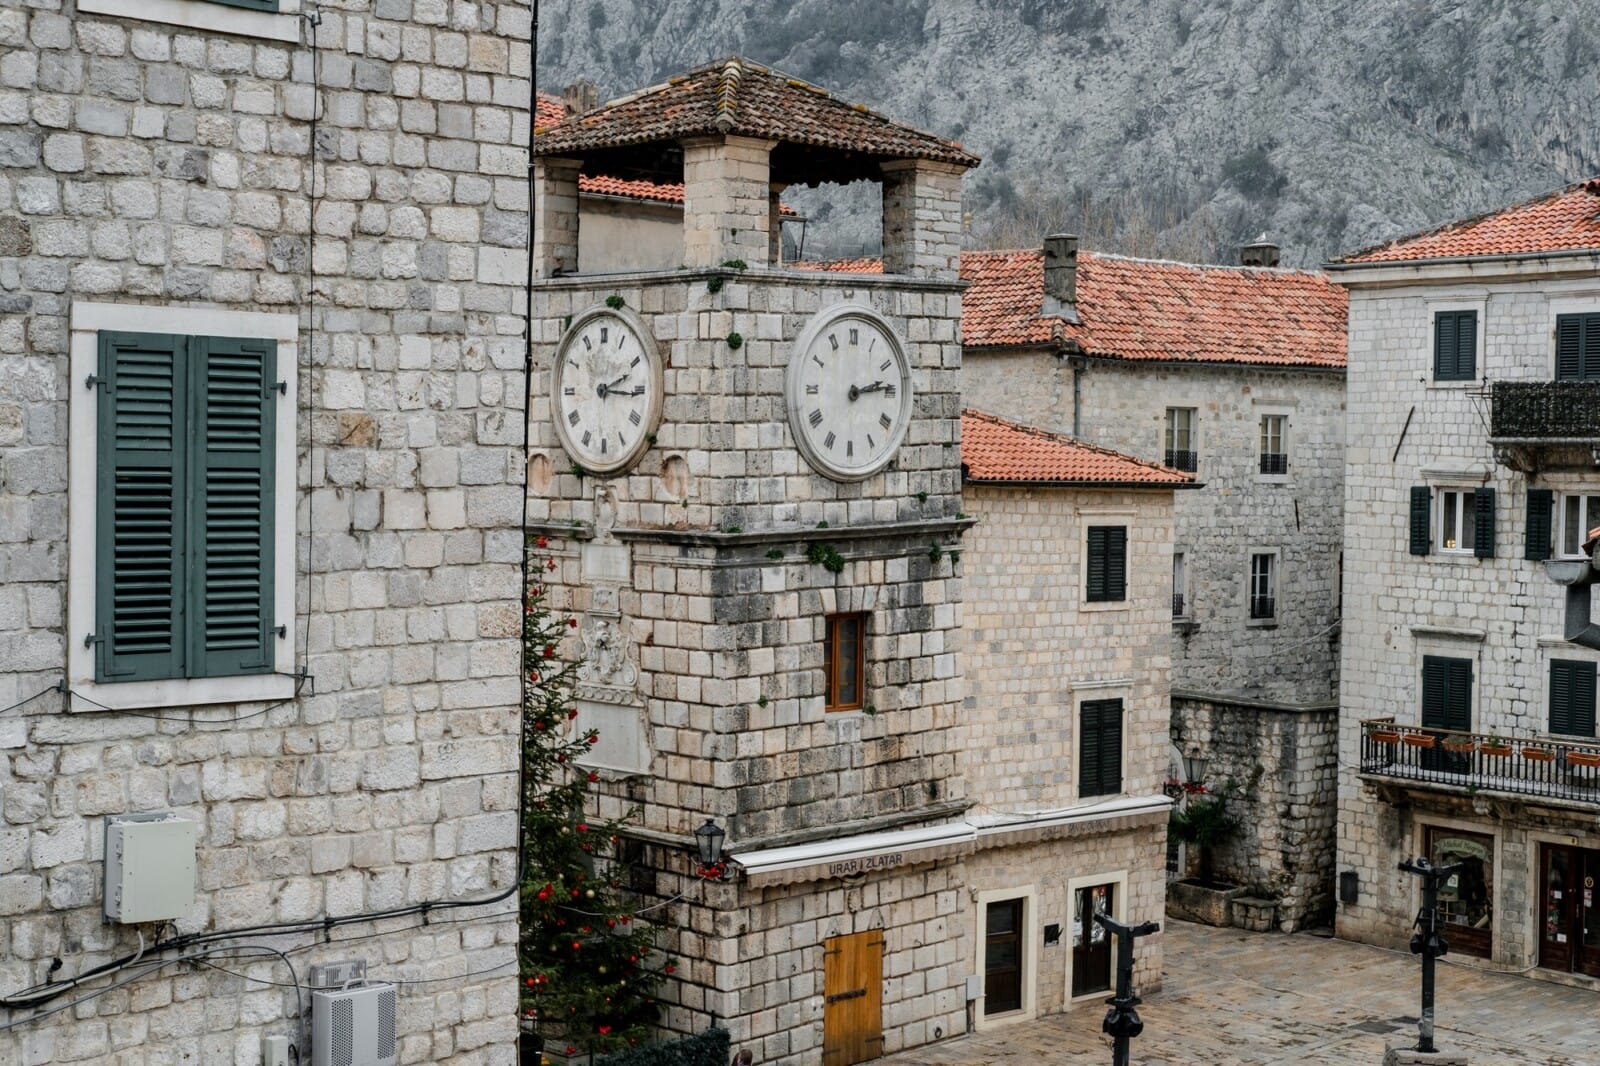 Brick house in the Old town of Kotor, Montenegro